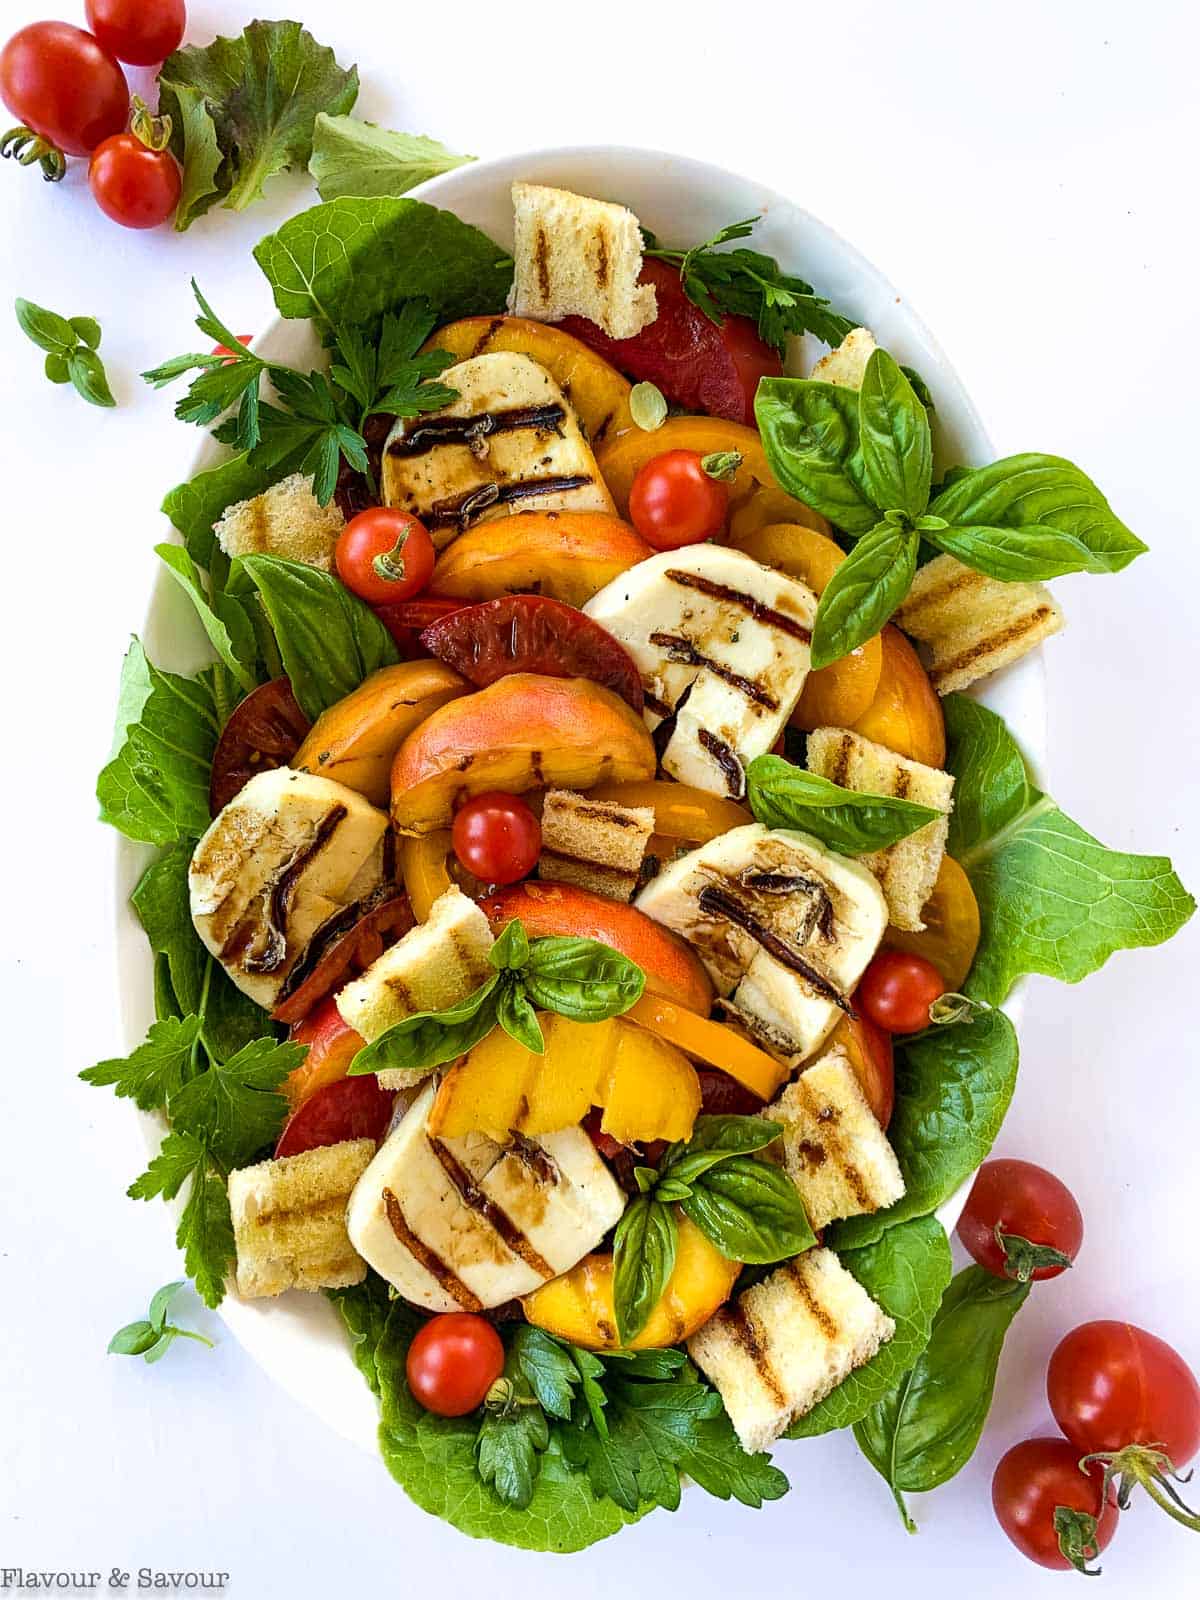 Overhead view of Grilled Halloumi Peach and Tomato Salad garnished with basil leaves